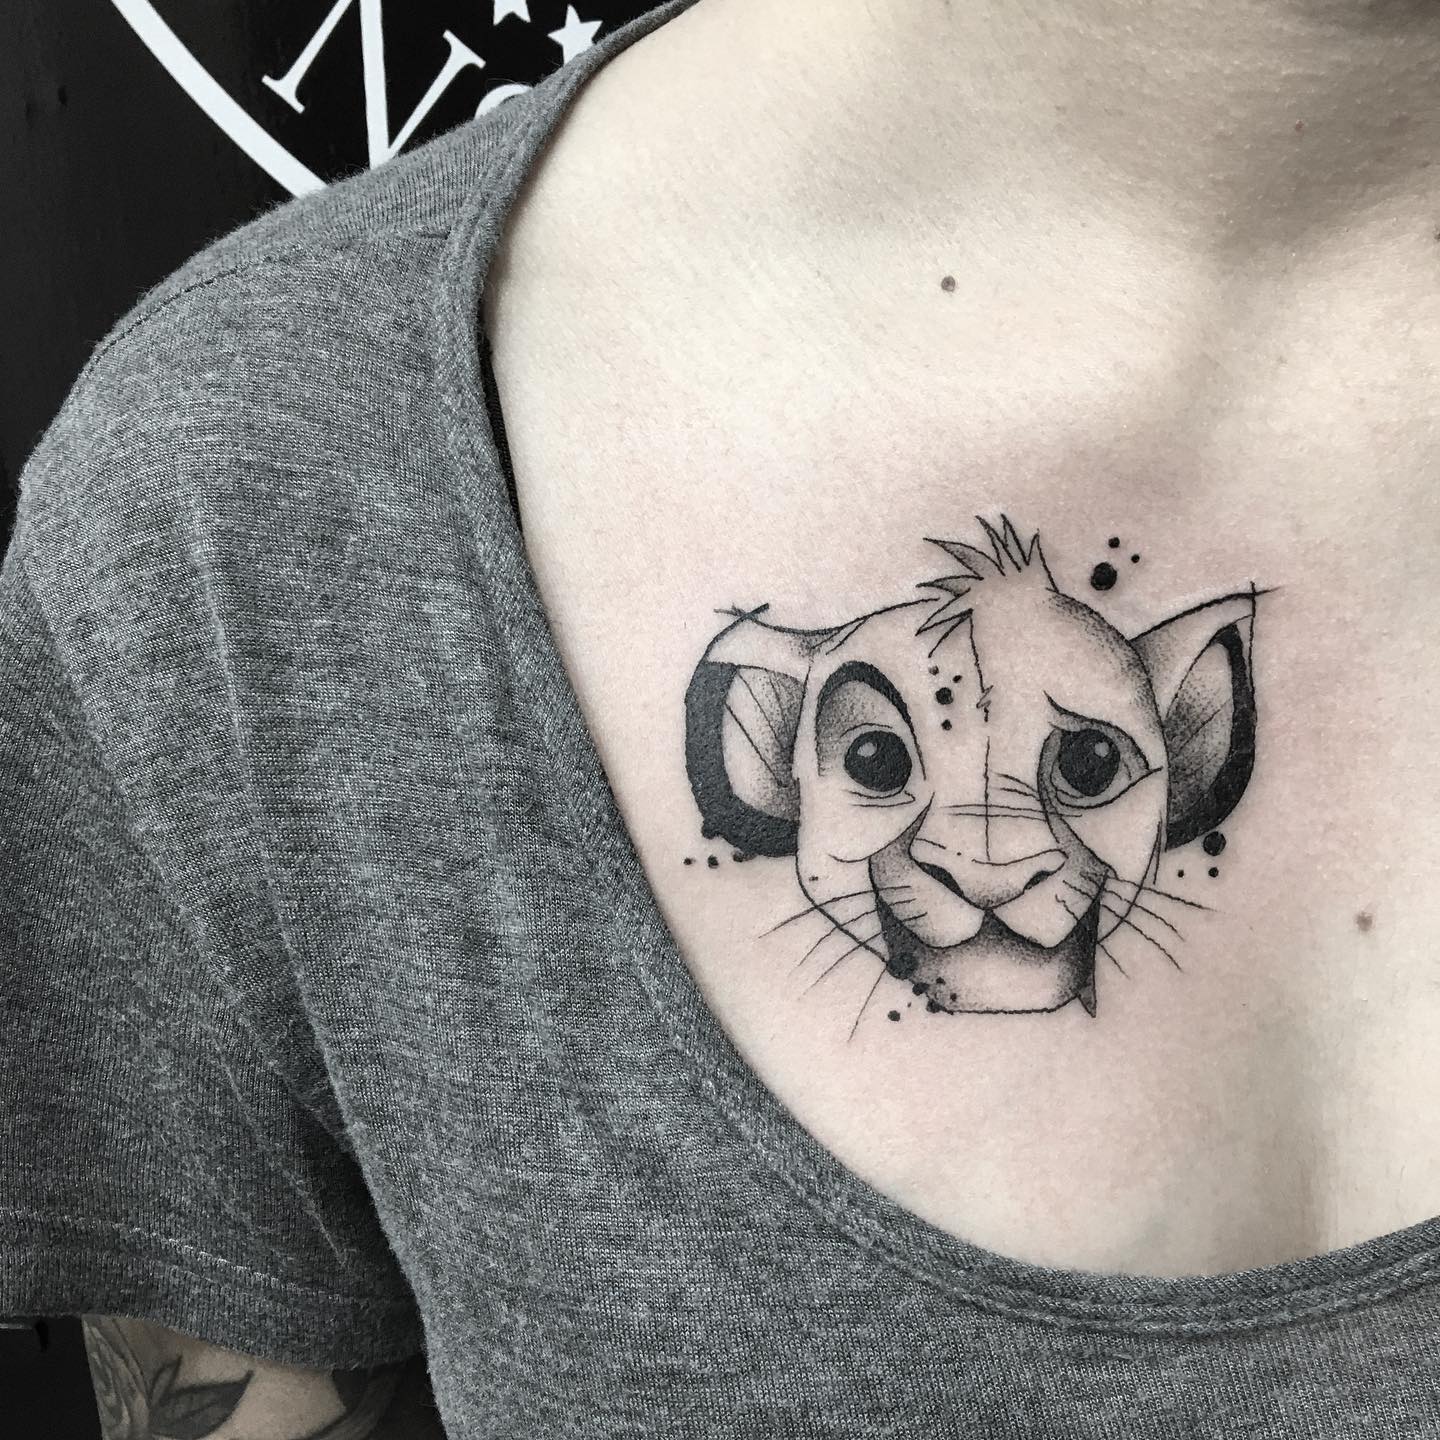 Everyone will notice your pretty lion cub tattoo.